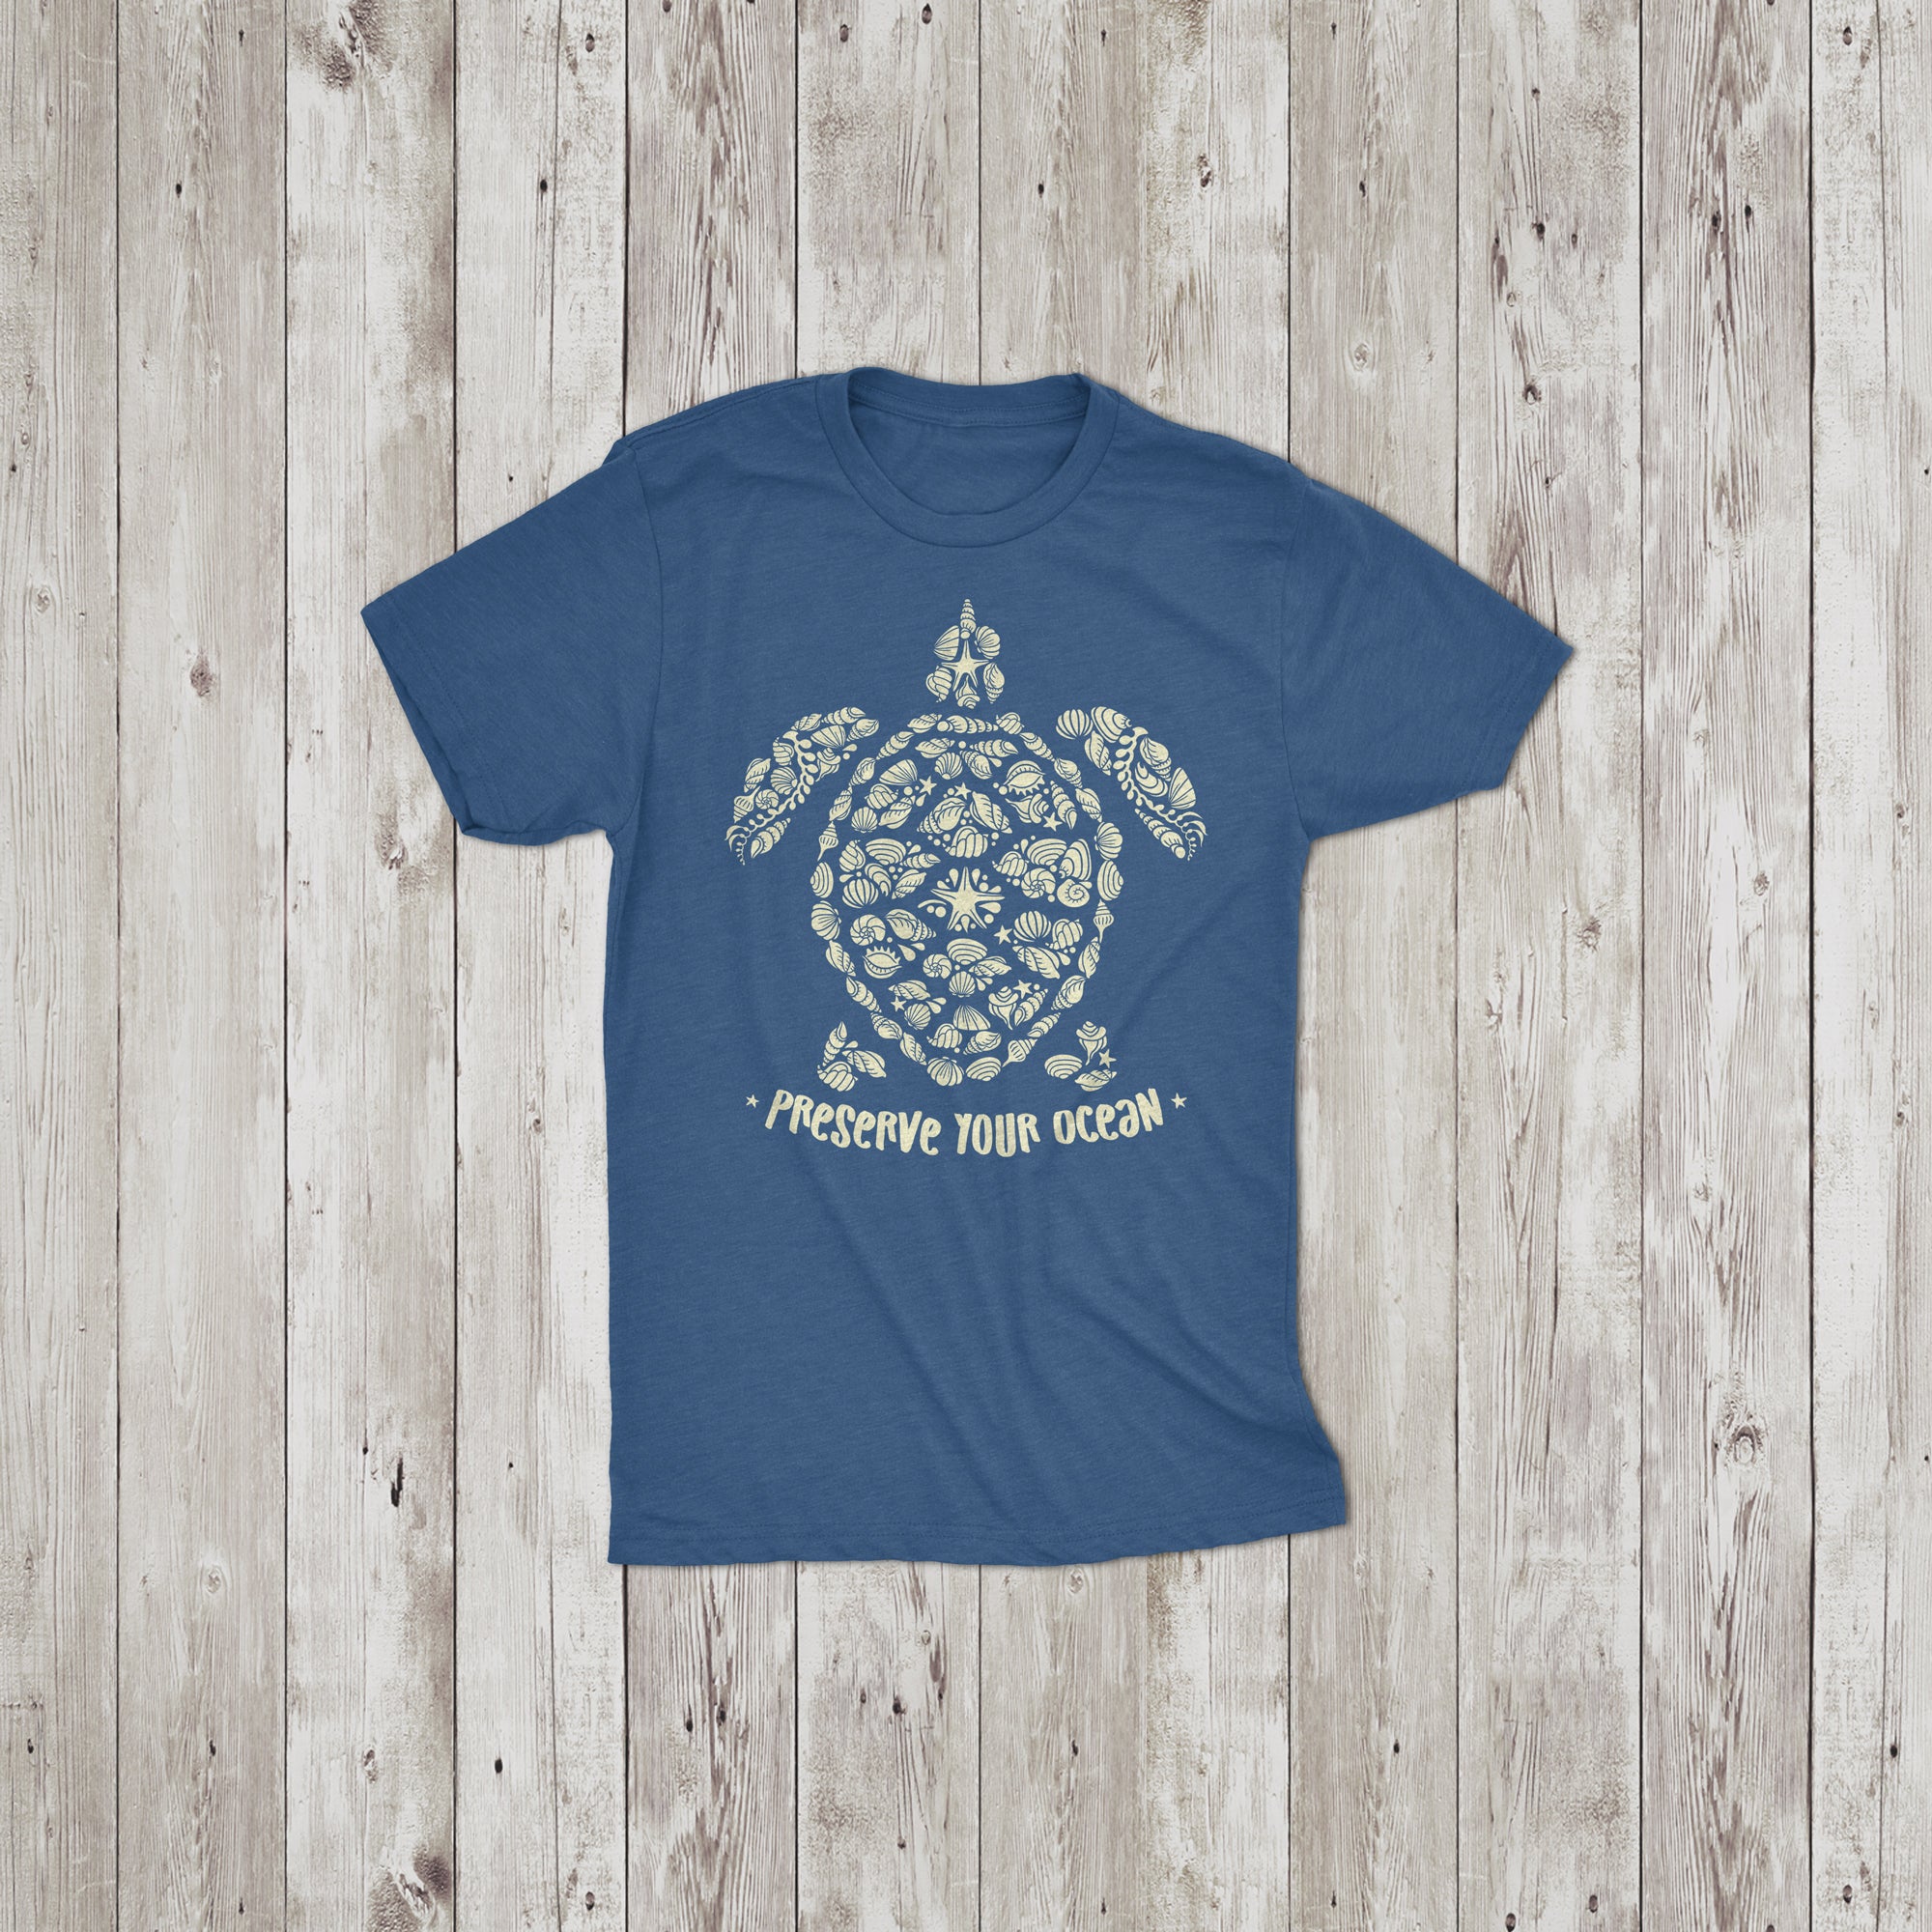 Protect The Ocean' T-Shirt Featuring Wyland's 'Friendly Sea Turtle' (T-Shirt Size: M)